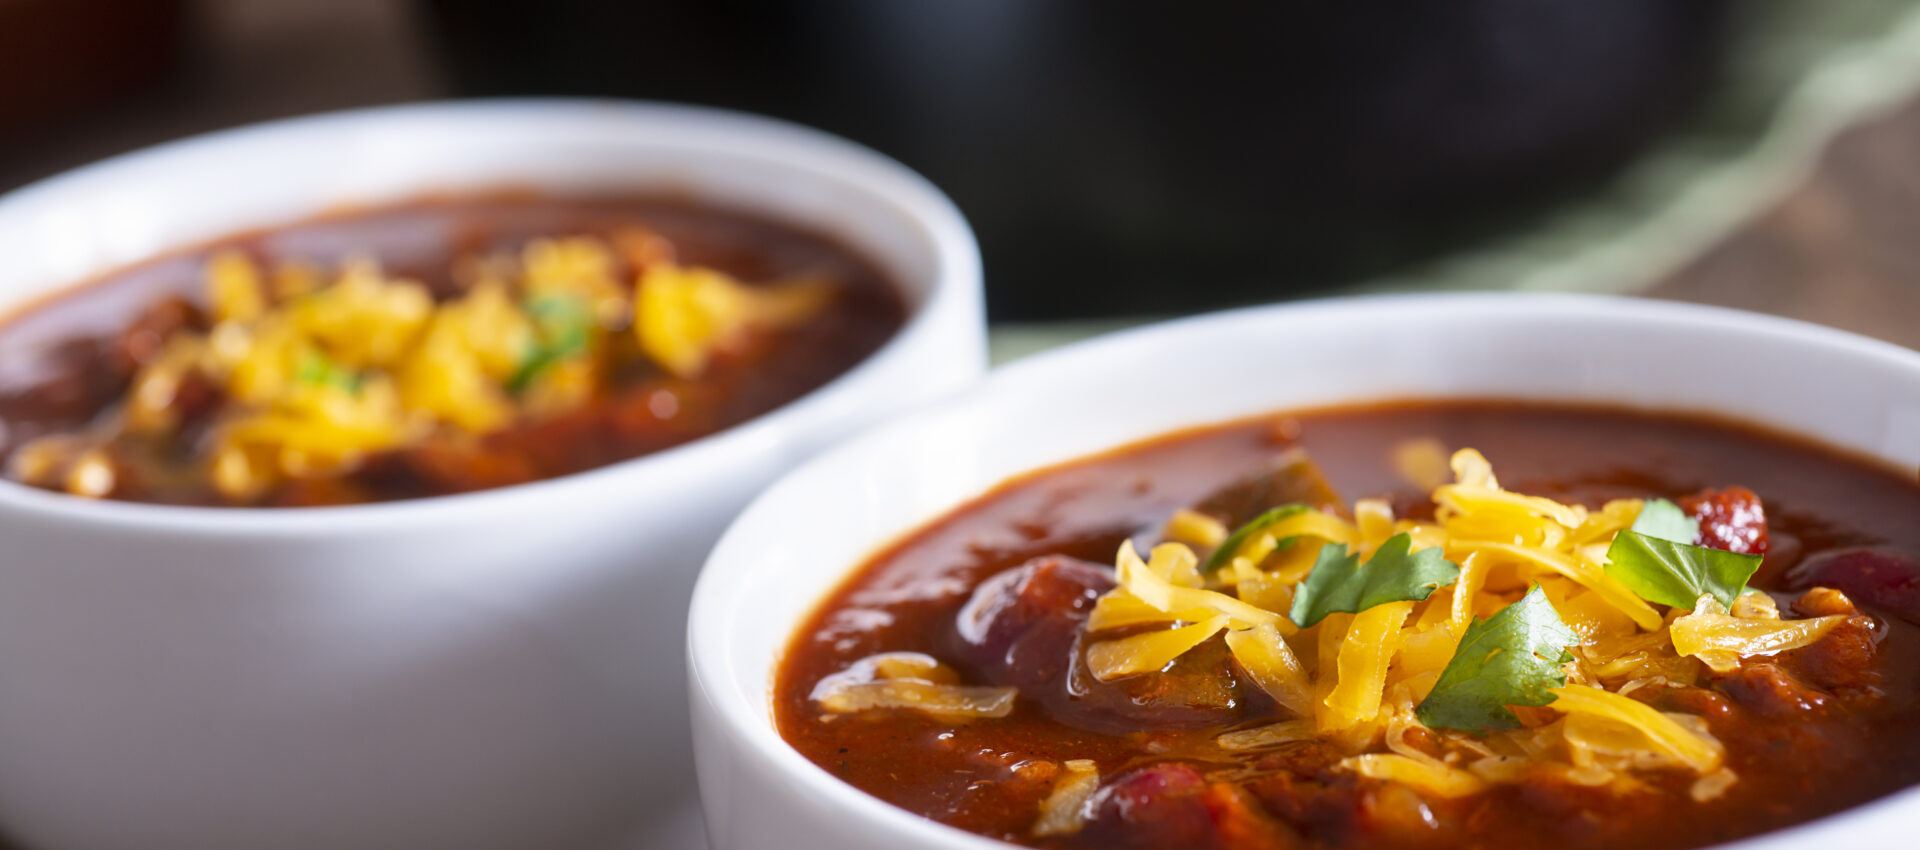 Homemade Chili Recipe with Cilantro and Cheddar Cheese